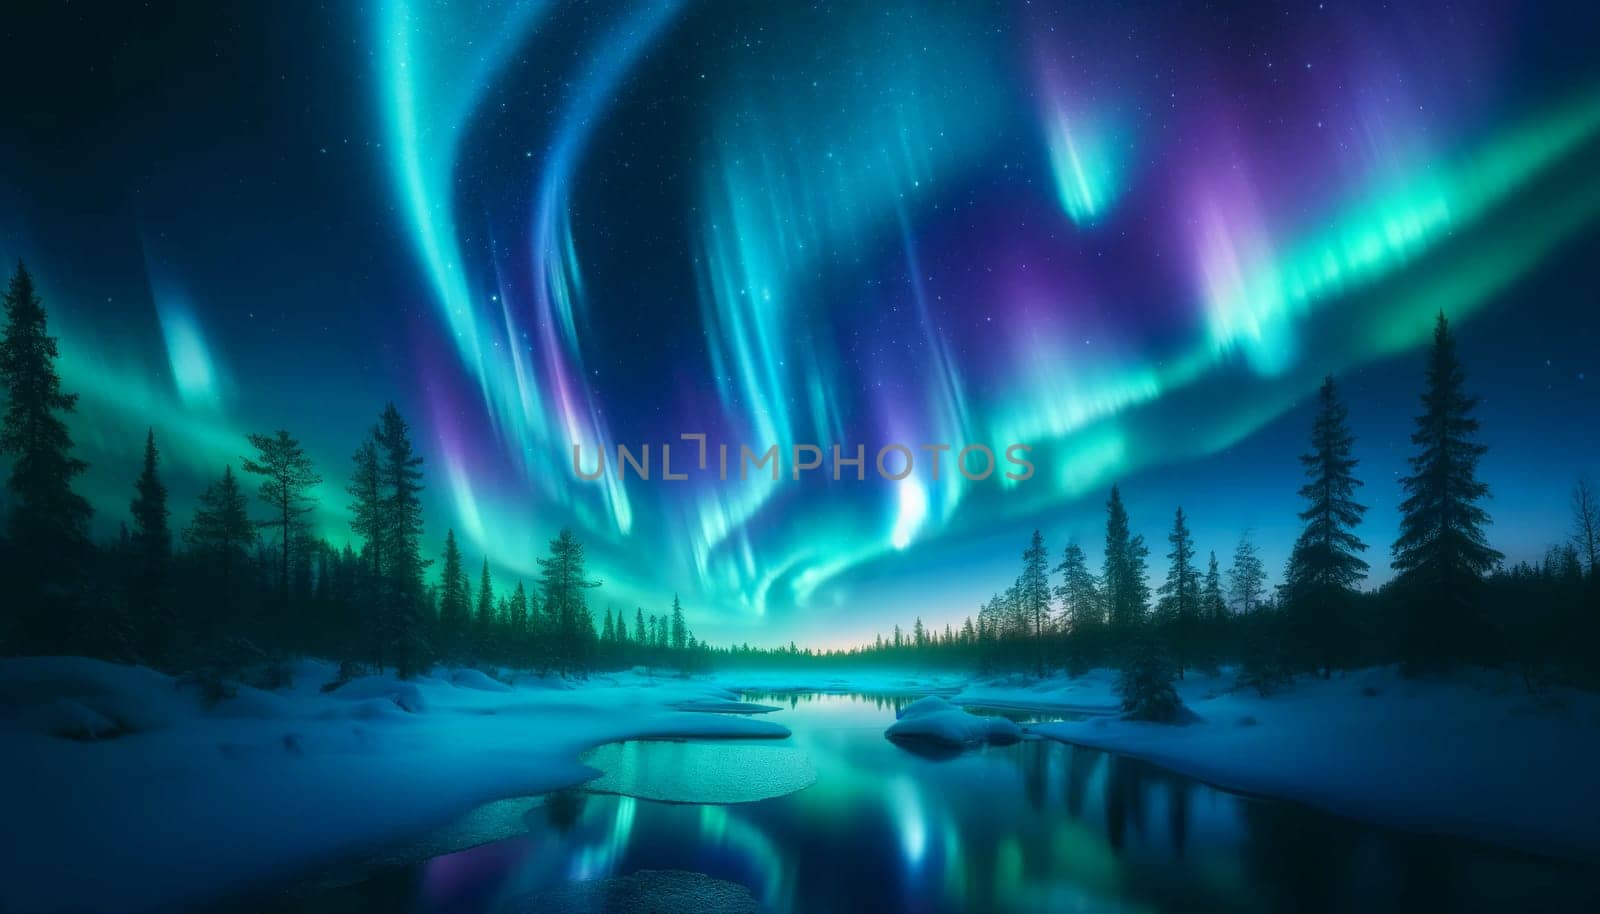 Northern lights in blue tones over a snow-covered river and forest by Annado